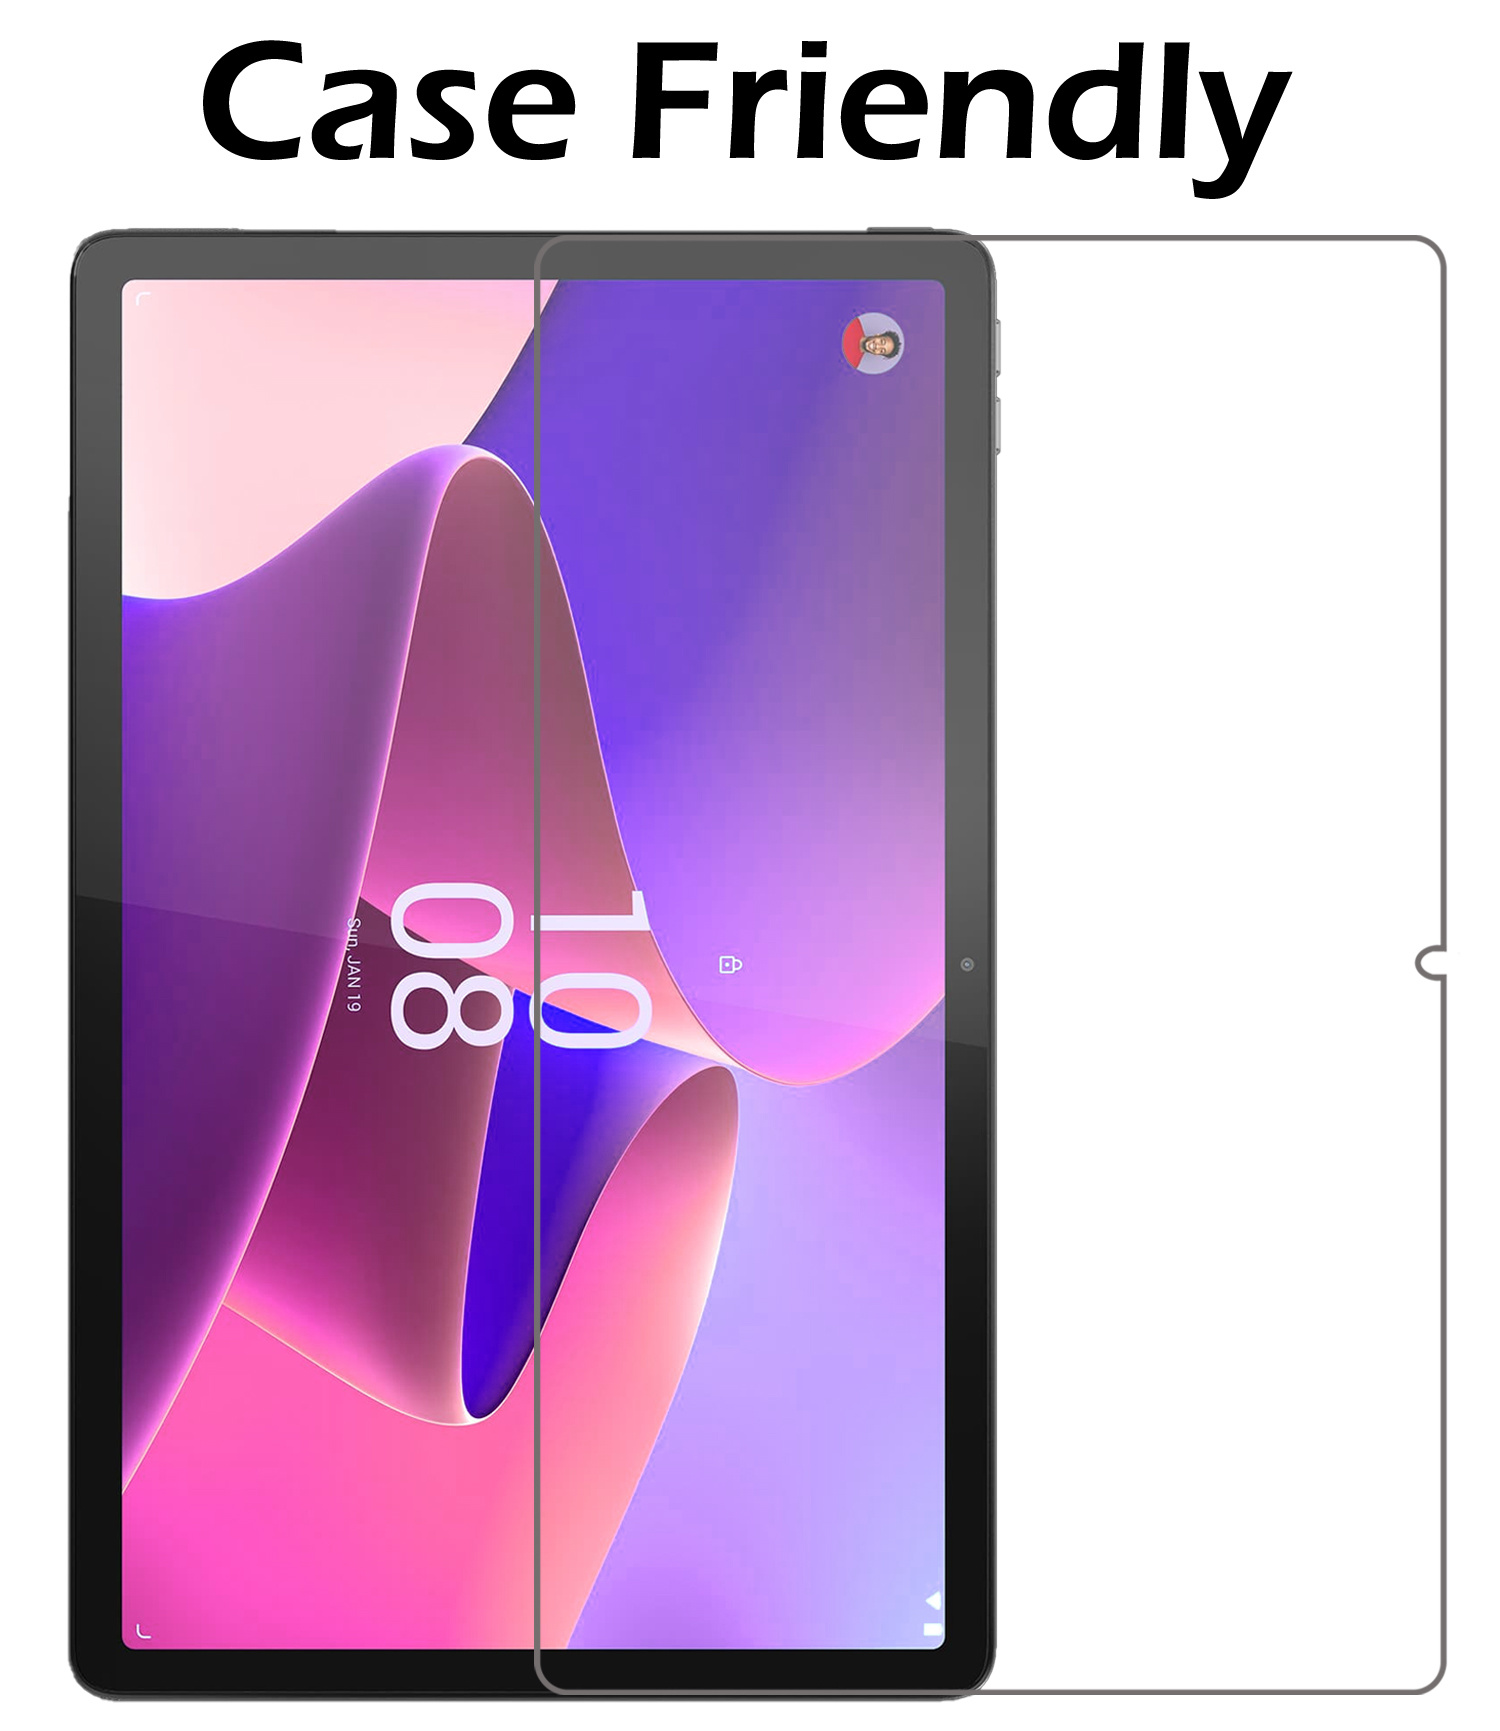 Nomfy Lenovo Tab P11 Pro Hoesje Case Met Uitsparing Voor Lenovo Pen Met Screenprotector - Lenovo Tab P11 Pro Hoes (2e gen) Cover - Don't Touch Me